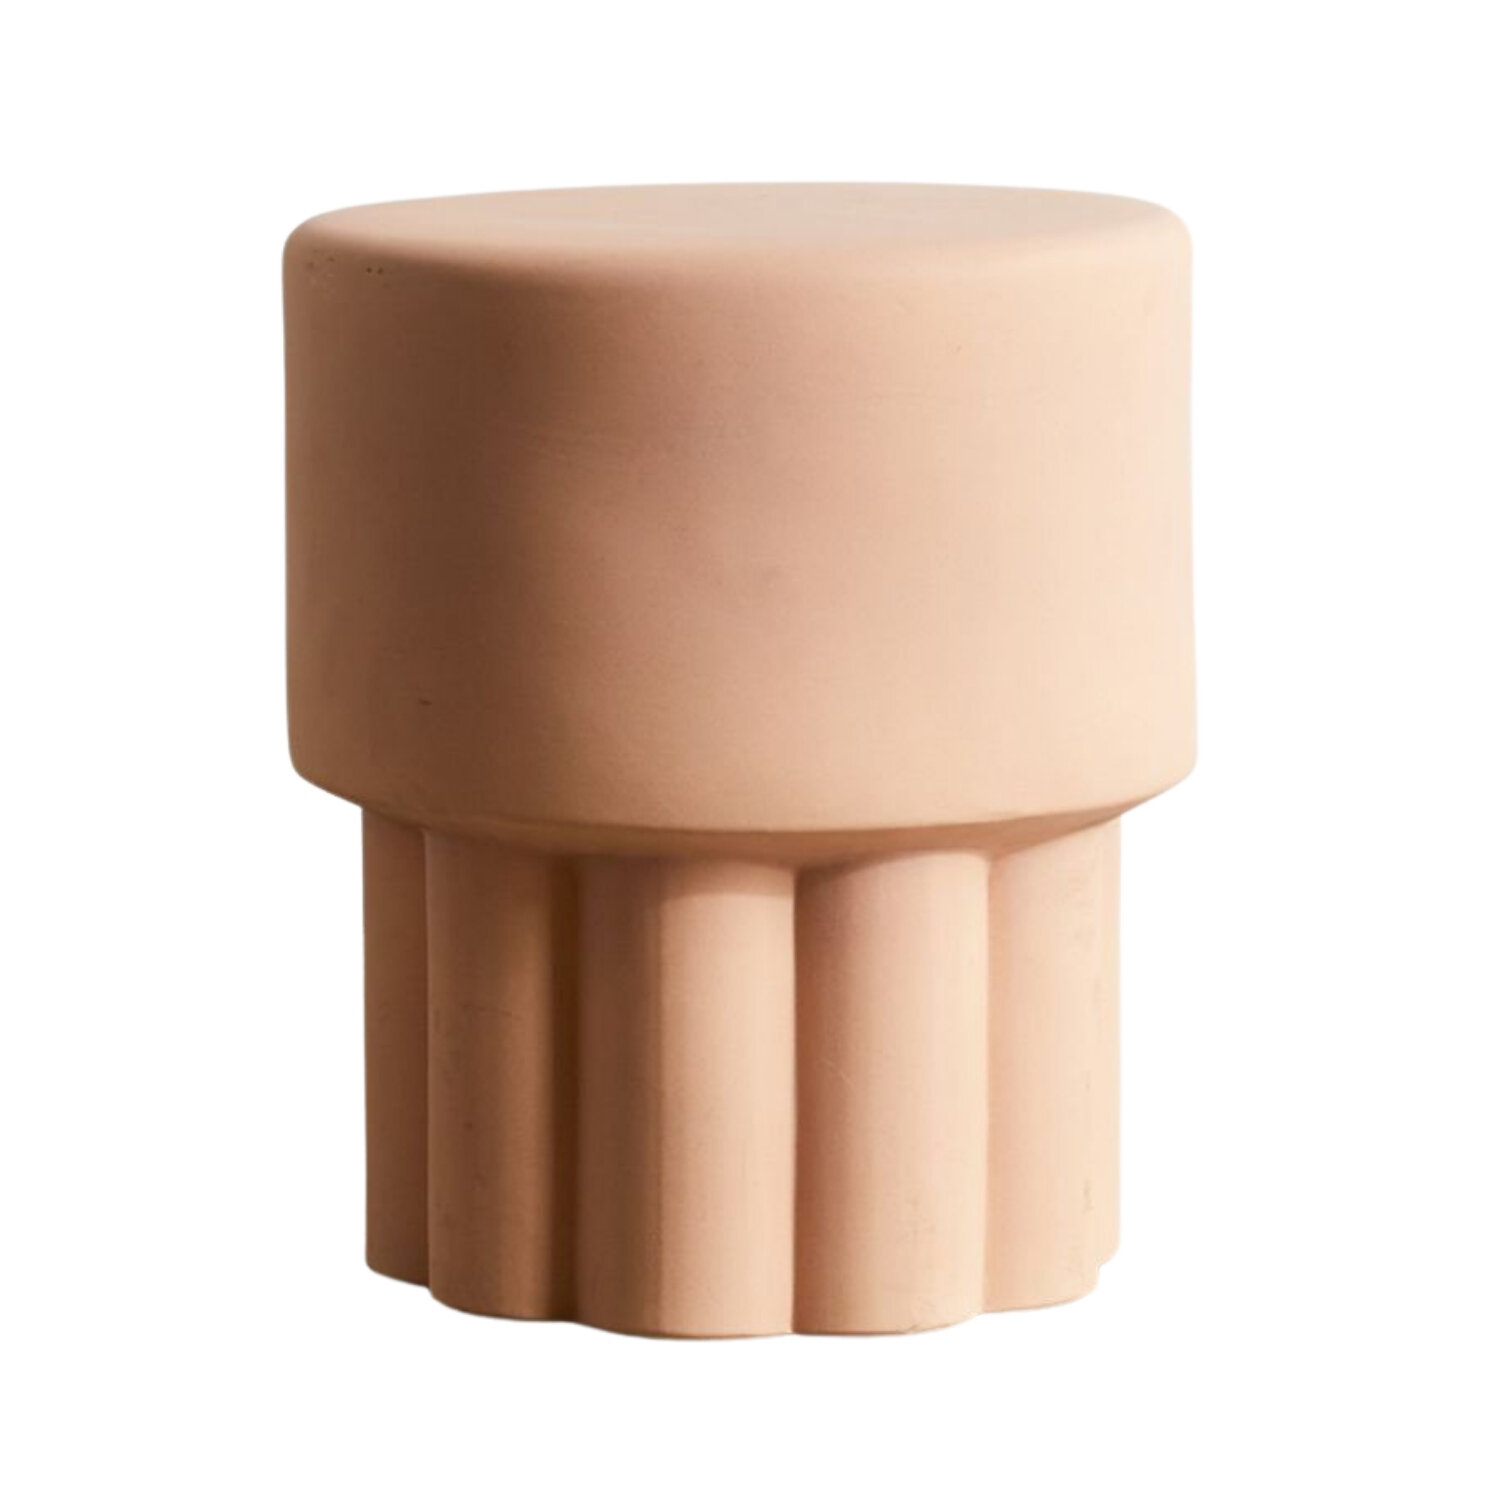 Mila Scallop Ceramic Stool, Urban Outfitters, $179